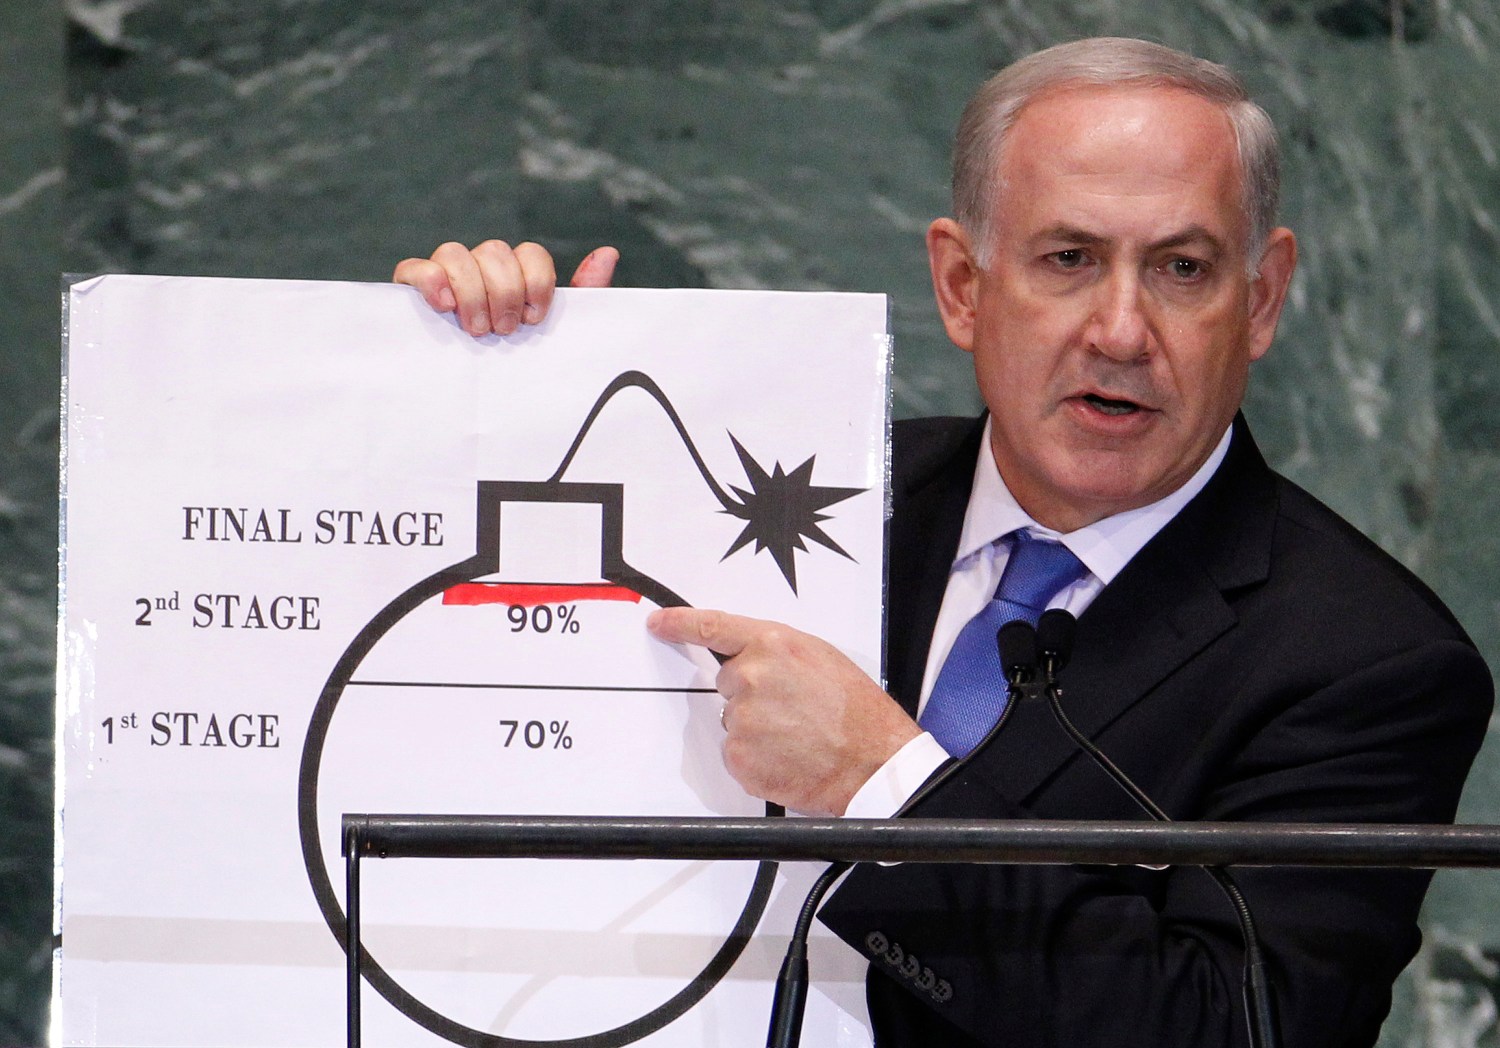 Israel's Prime Minister Benjamin Netanyahu points to a red line he drew on the graphic of a bomb used to represent Iran's nuclear program as he addresses the 67th United Nations General Assembly at the U.N. Headquarters in New York, September 27, 2012. The red line represents a point where he believes the international community should tell Iran that they will not be allowed to pass without intervention. REUTERS/Lucas Jackson (UNITED STATES - Tags: POLITICS) - RTR38I79